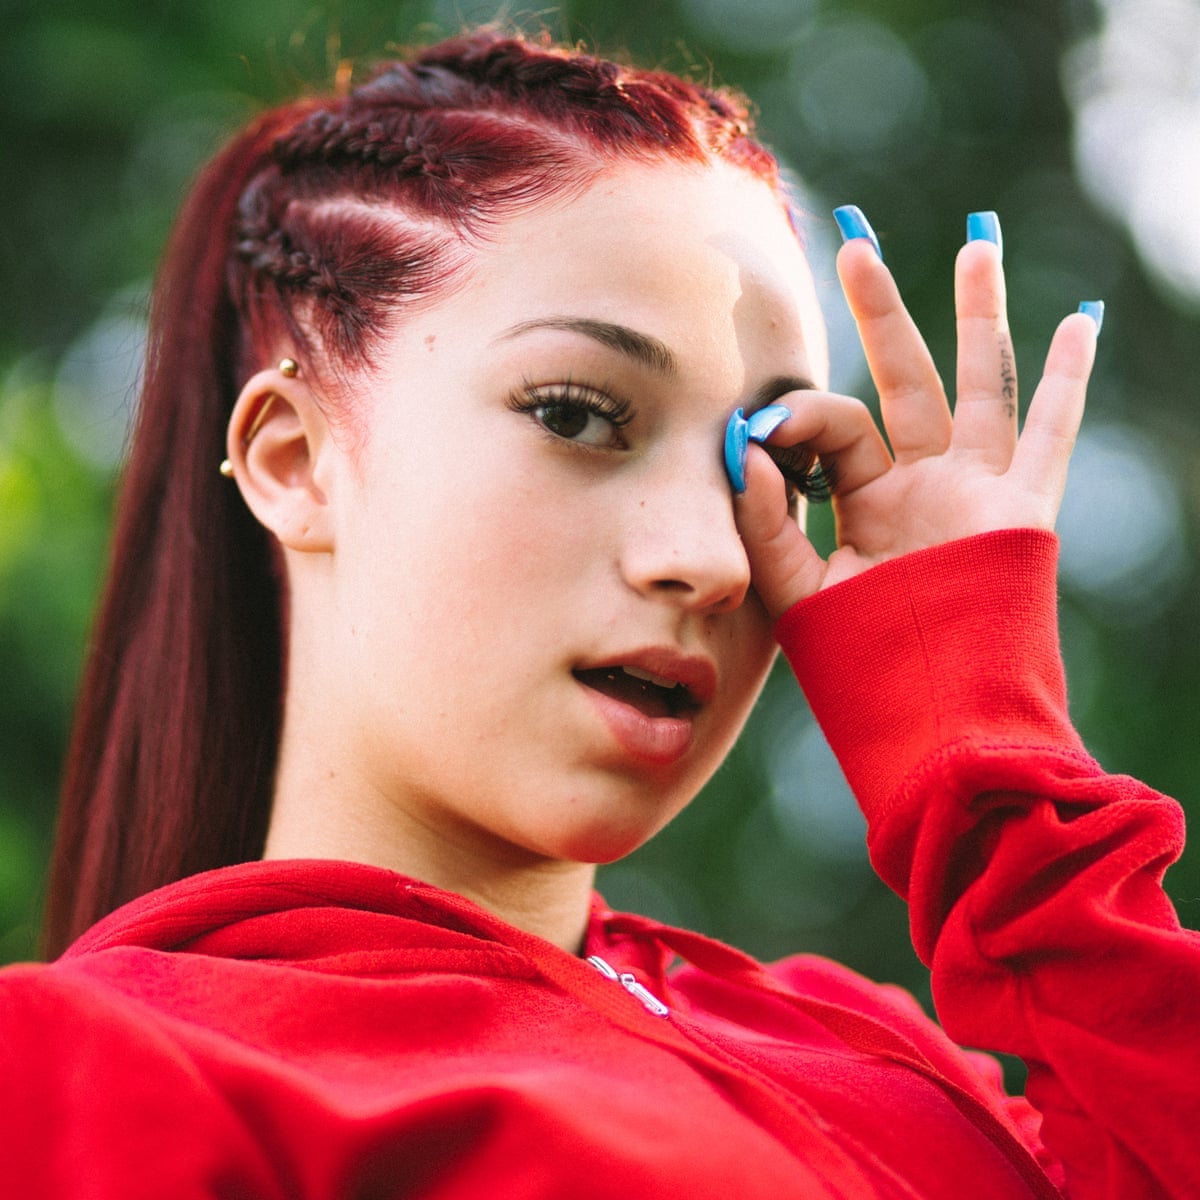 Bhabie page bhad onlyfans Bhad Bhabie